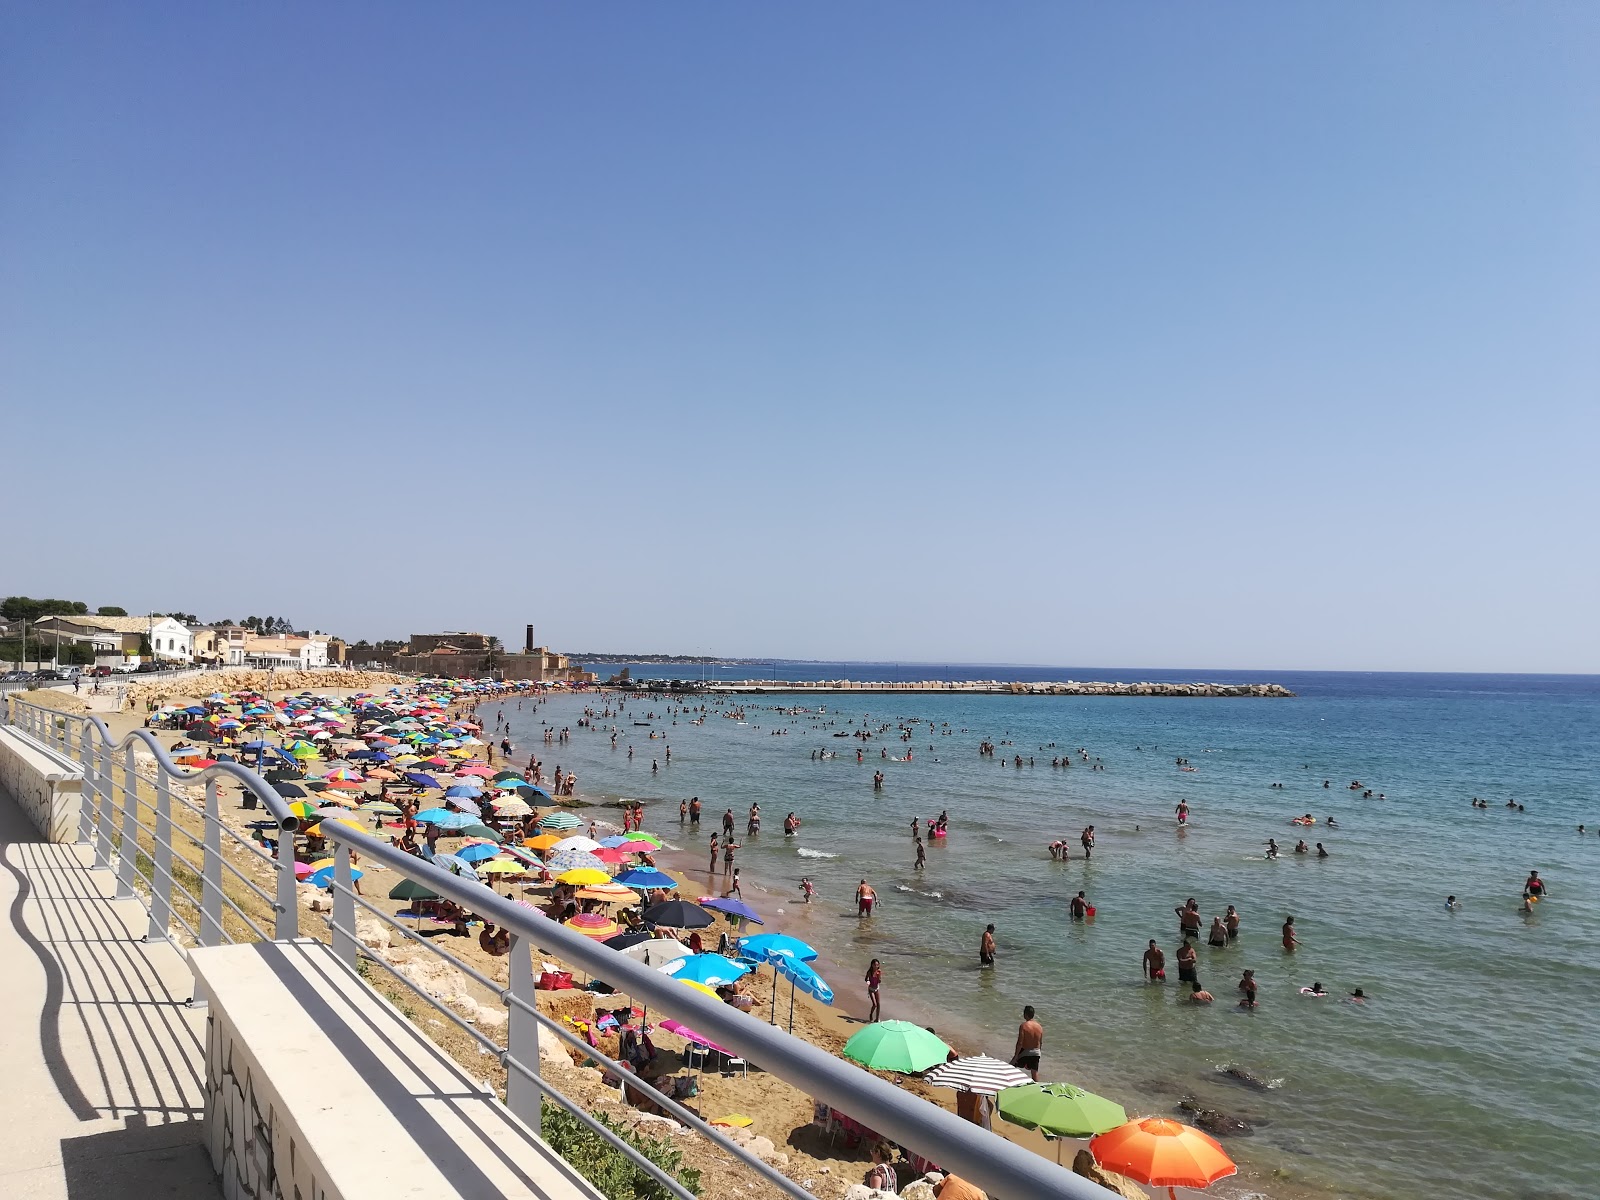 Photo of Spiaggia Di Avola - popular place among relax connoisseurs